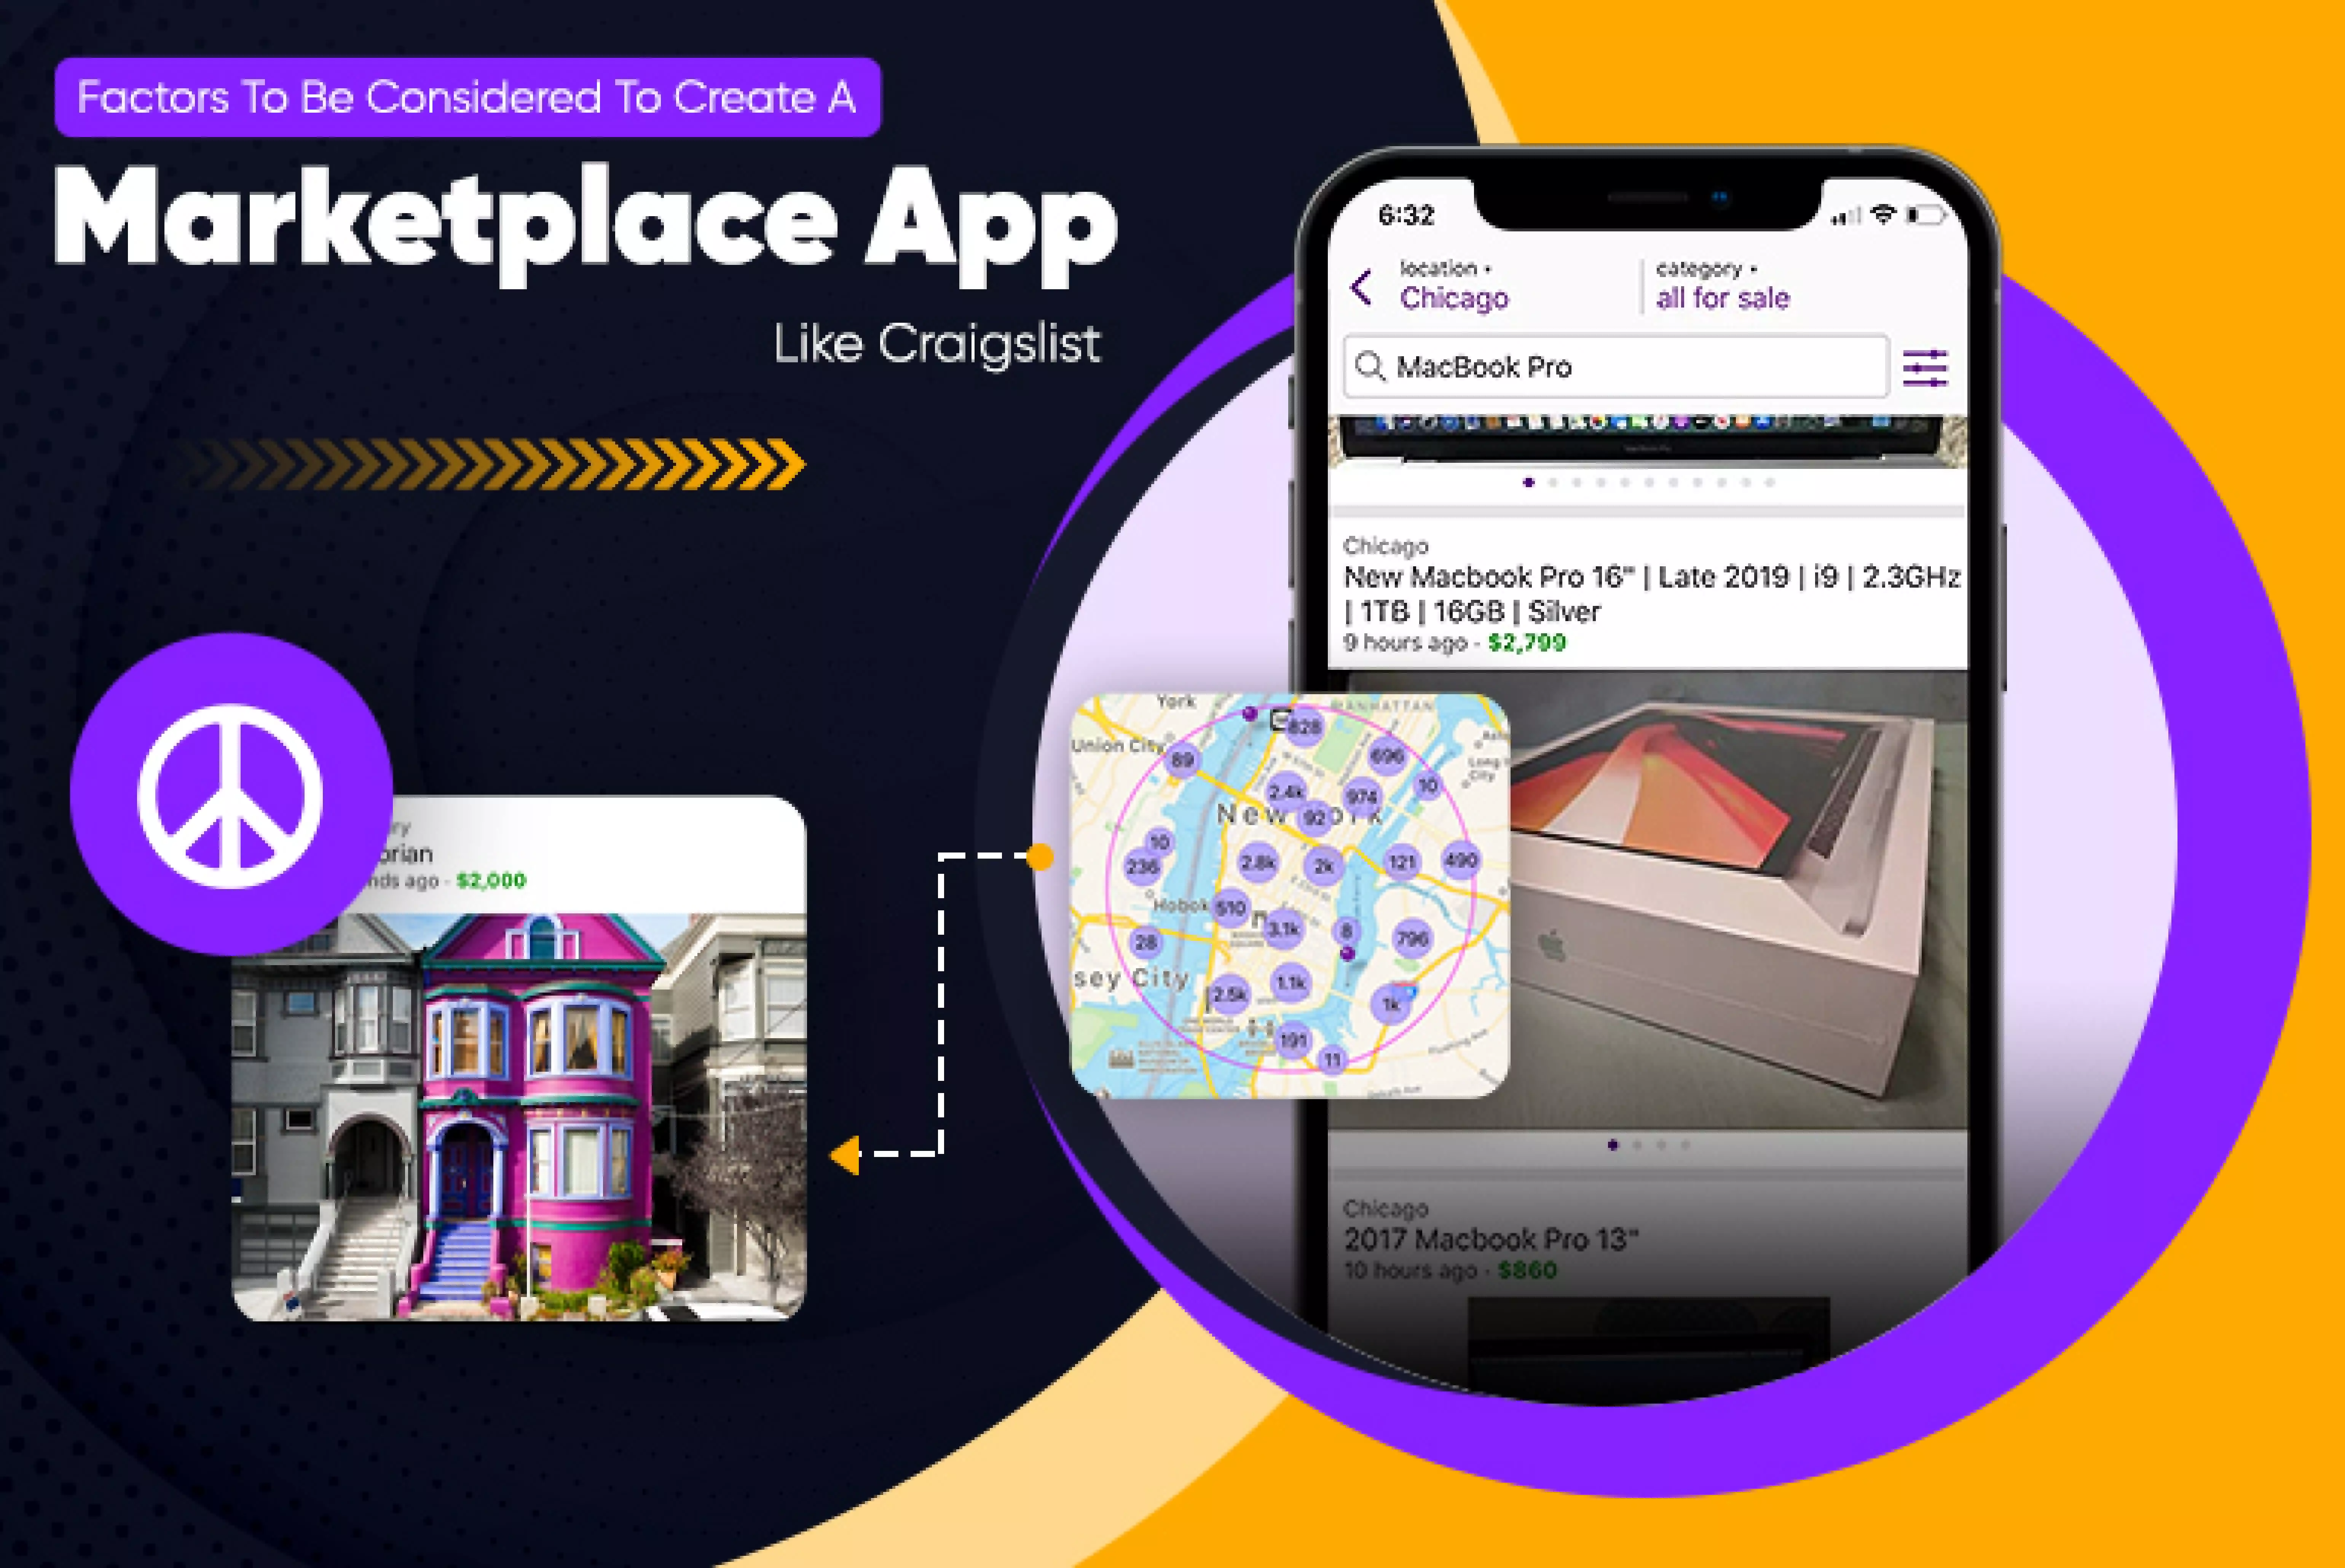 Factors to be considered to create a marketplace app like Craigslist_Thum